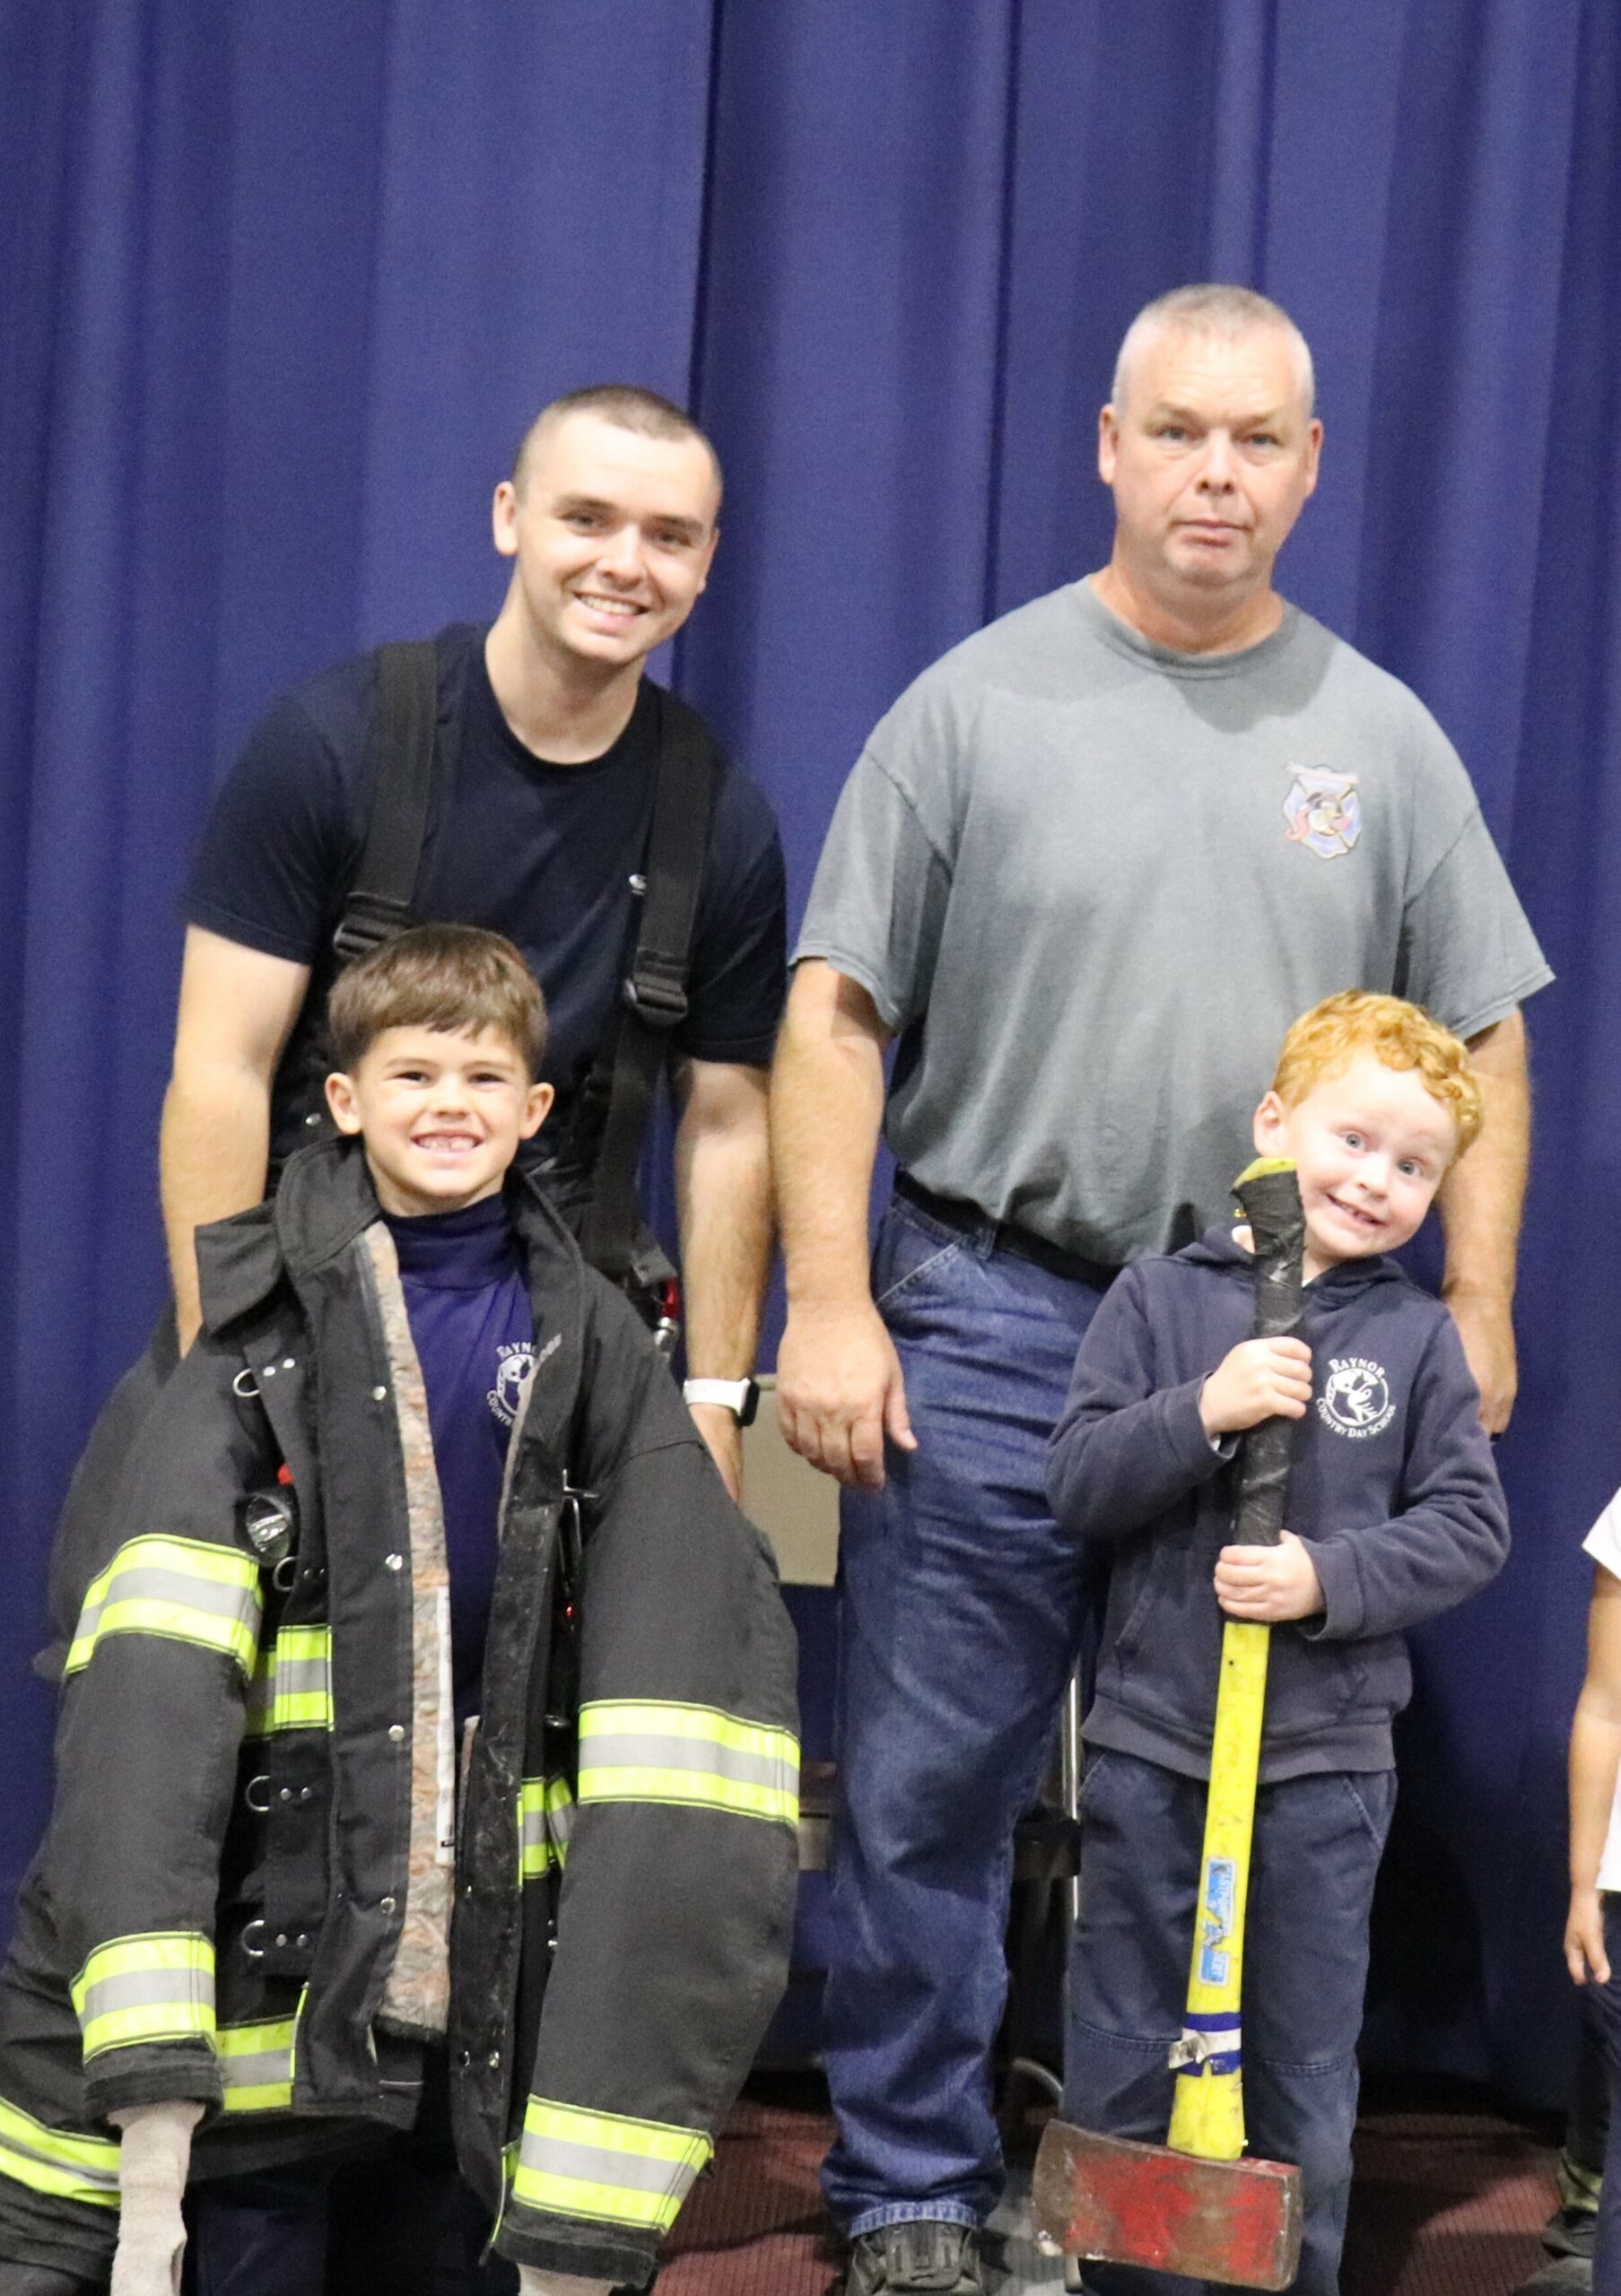 The Eastport Fire Department visited Raynor Country Day School on October 22 to talk about fire safety and the new equipment the department has in its fleet. James Burkley and James Sullivan take a turn with some firefighting equipment with the assistance of a volunteer firefighter.  COURTESY RAYNOR COUNTRY DAY SCHOOL